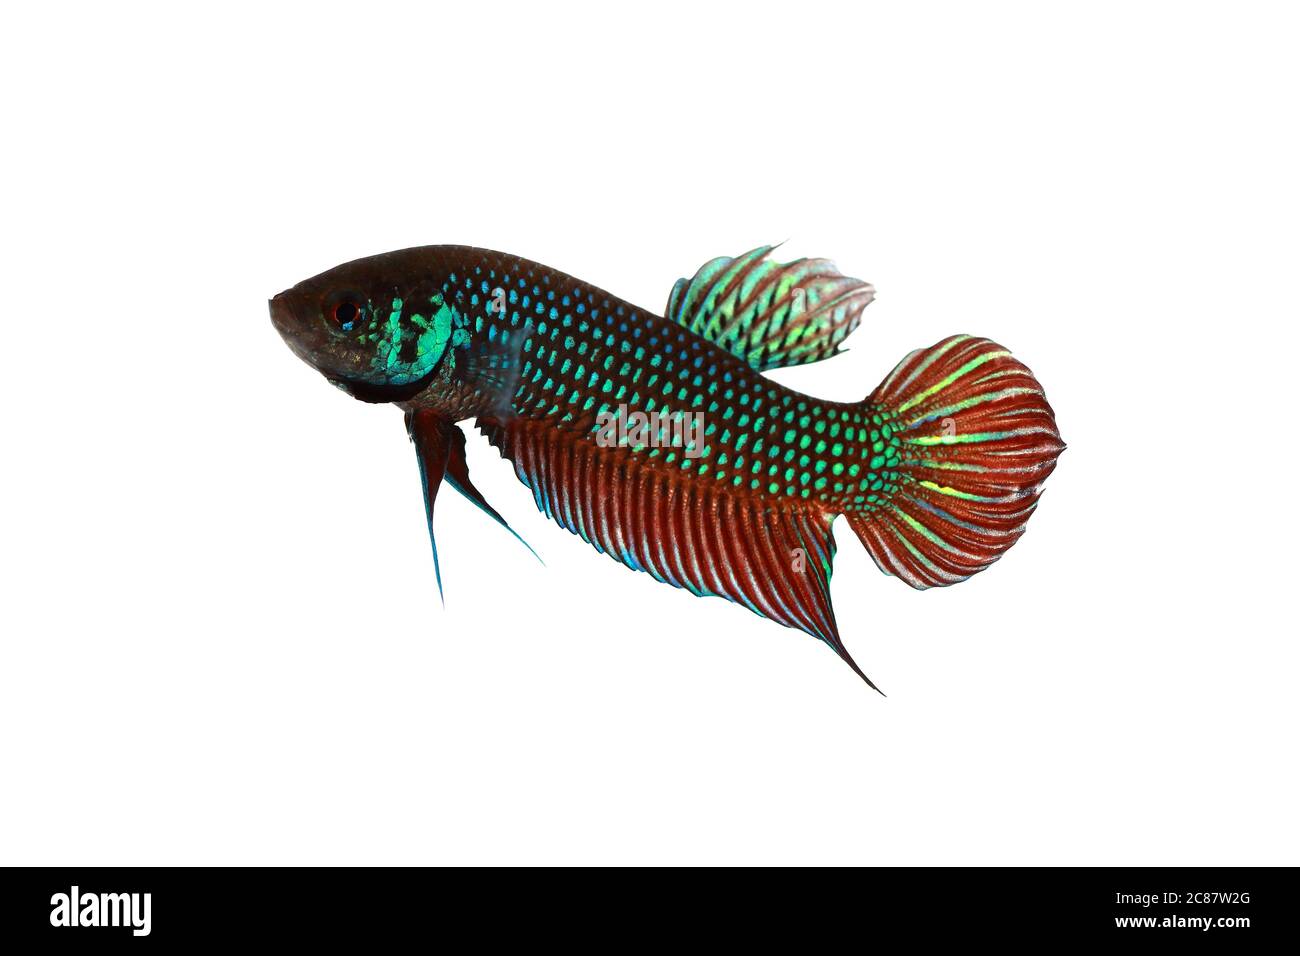 Siamese fighting fish (wild type: Betta mahachaiensis) on white background, B. mahachaiensis was discovered in 2012 from Thailand, Southeast Asia Stock Photo